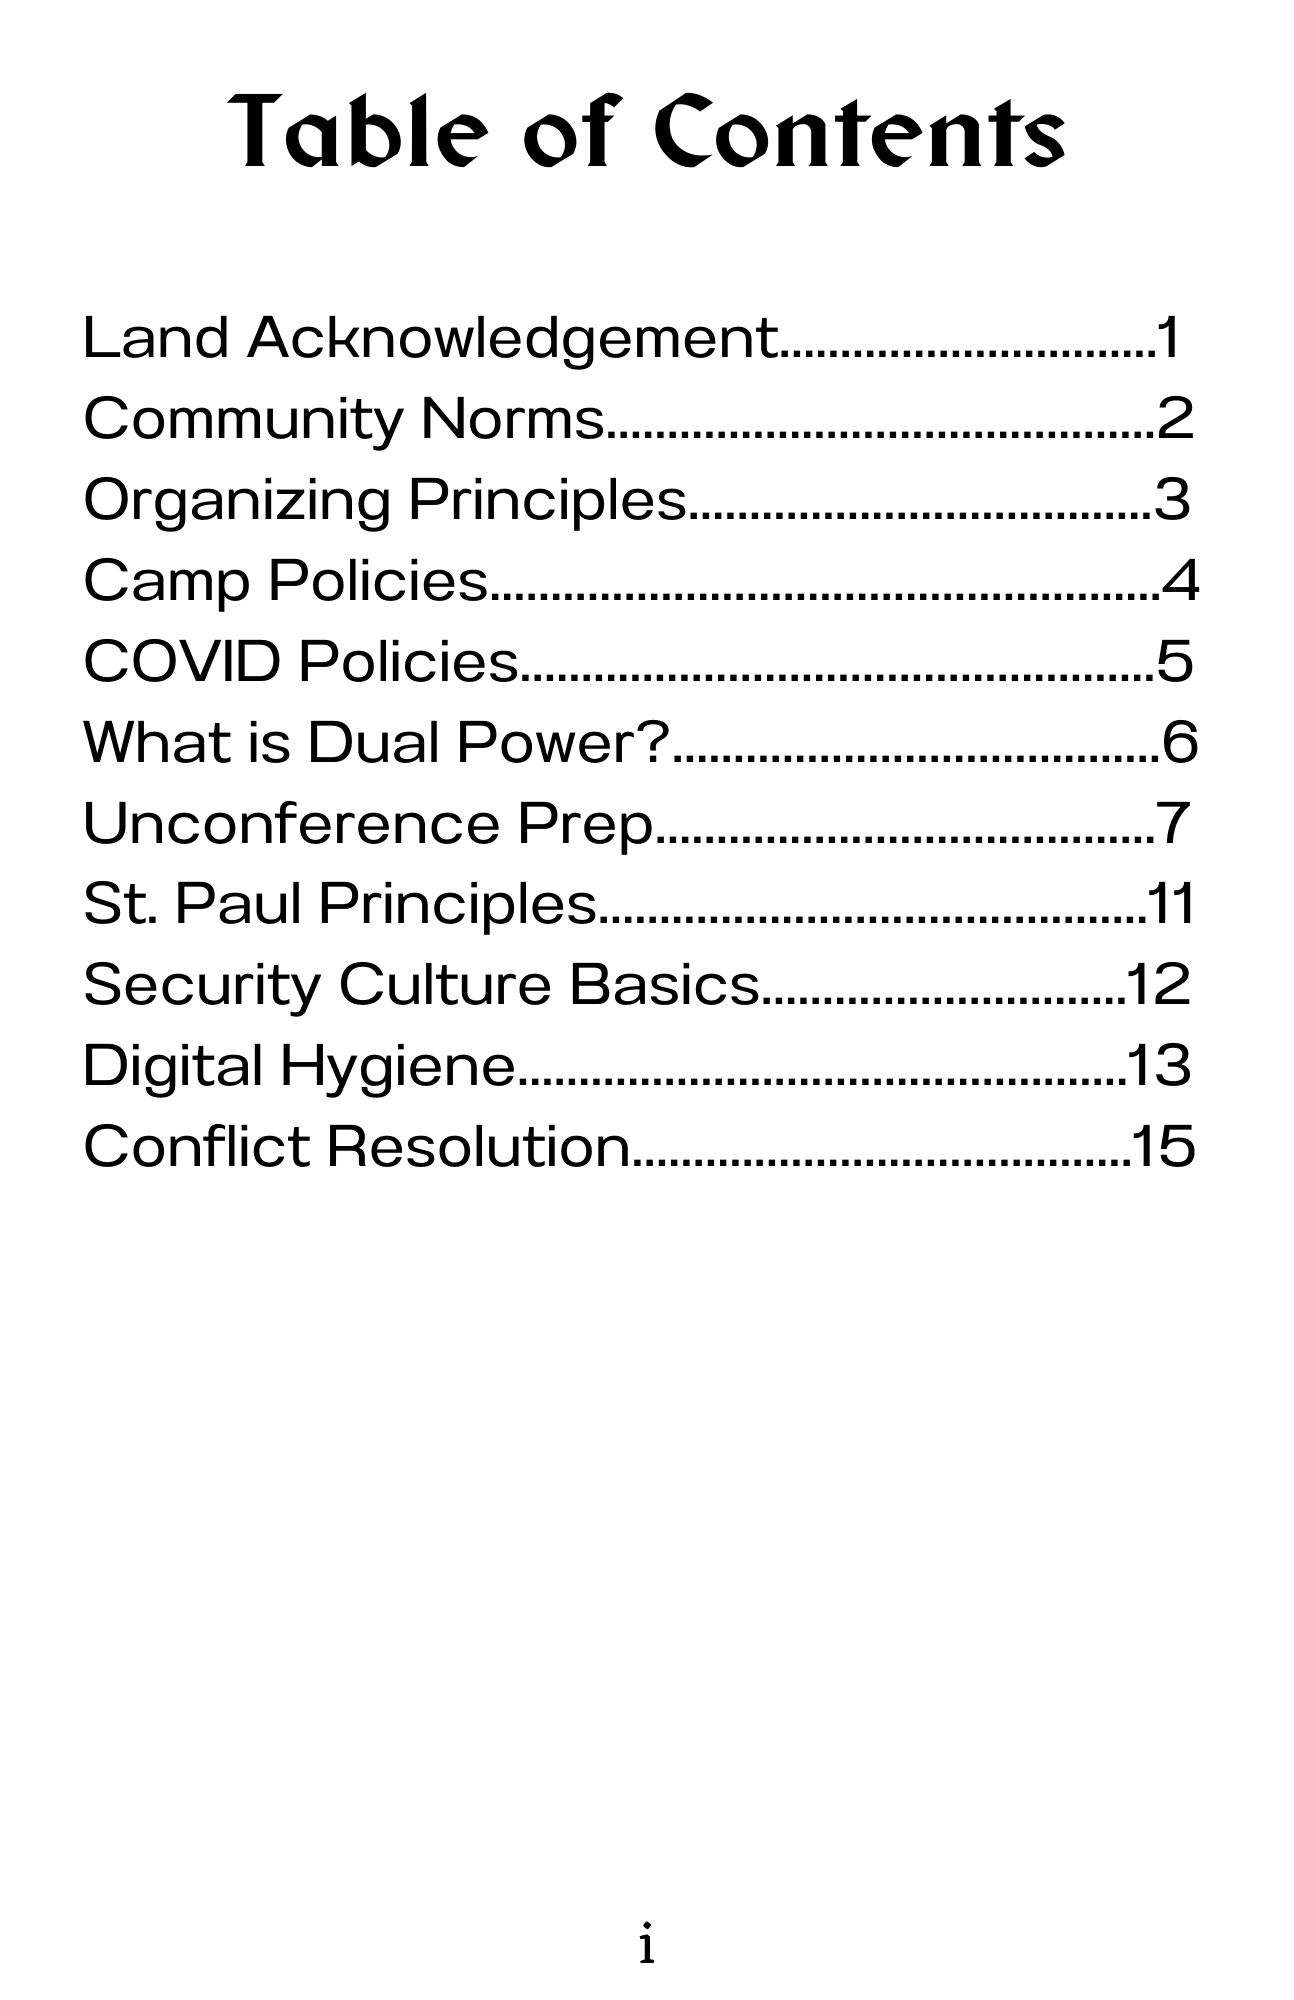 Page i: Table of Contents. Land Acknowledgement (page 1), Community Norms (page 2), Organizing Principles (page 3), Camp Policies (page 4), COVID Policies (page 5), What is Dual Pwoer (page 6), Unconference Prep (page 7), St. Paul Principles (page 11), Security Culture Basics (page 12), Digital Hygiene (page 13), Conflict Resolution (page 15)